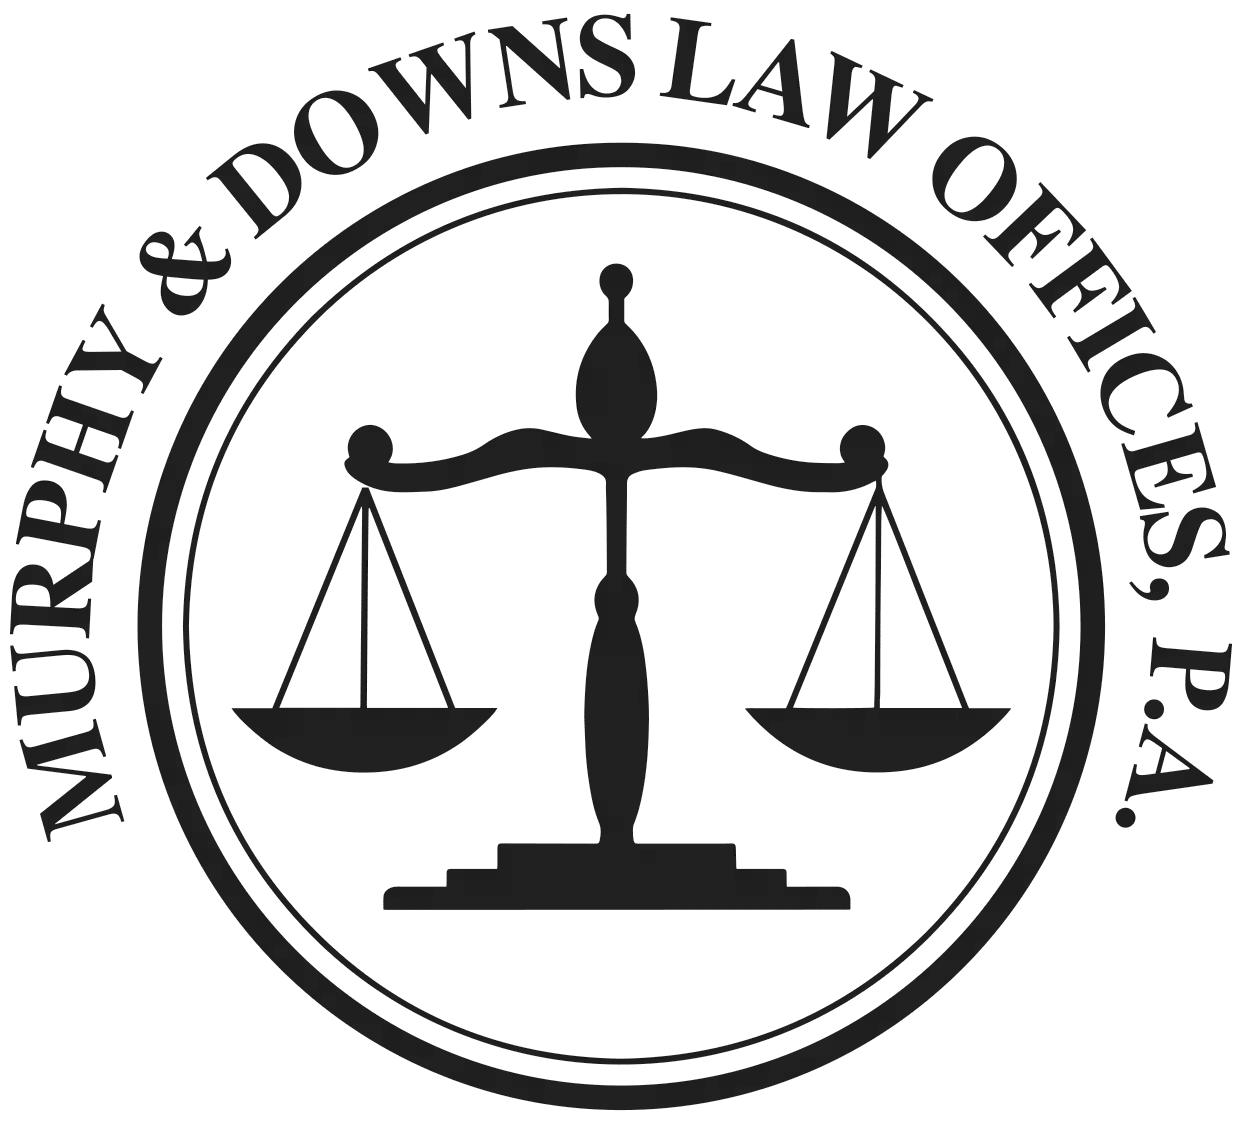 Murphy & Downs Law Offices, P.A.